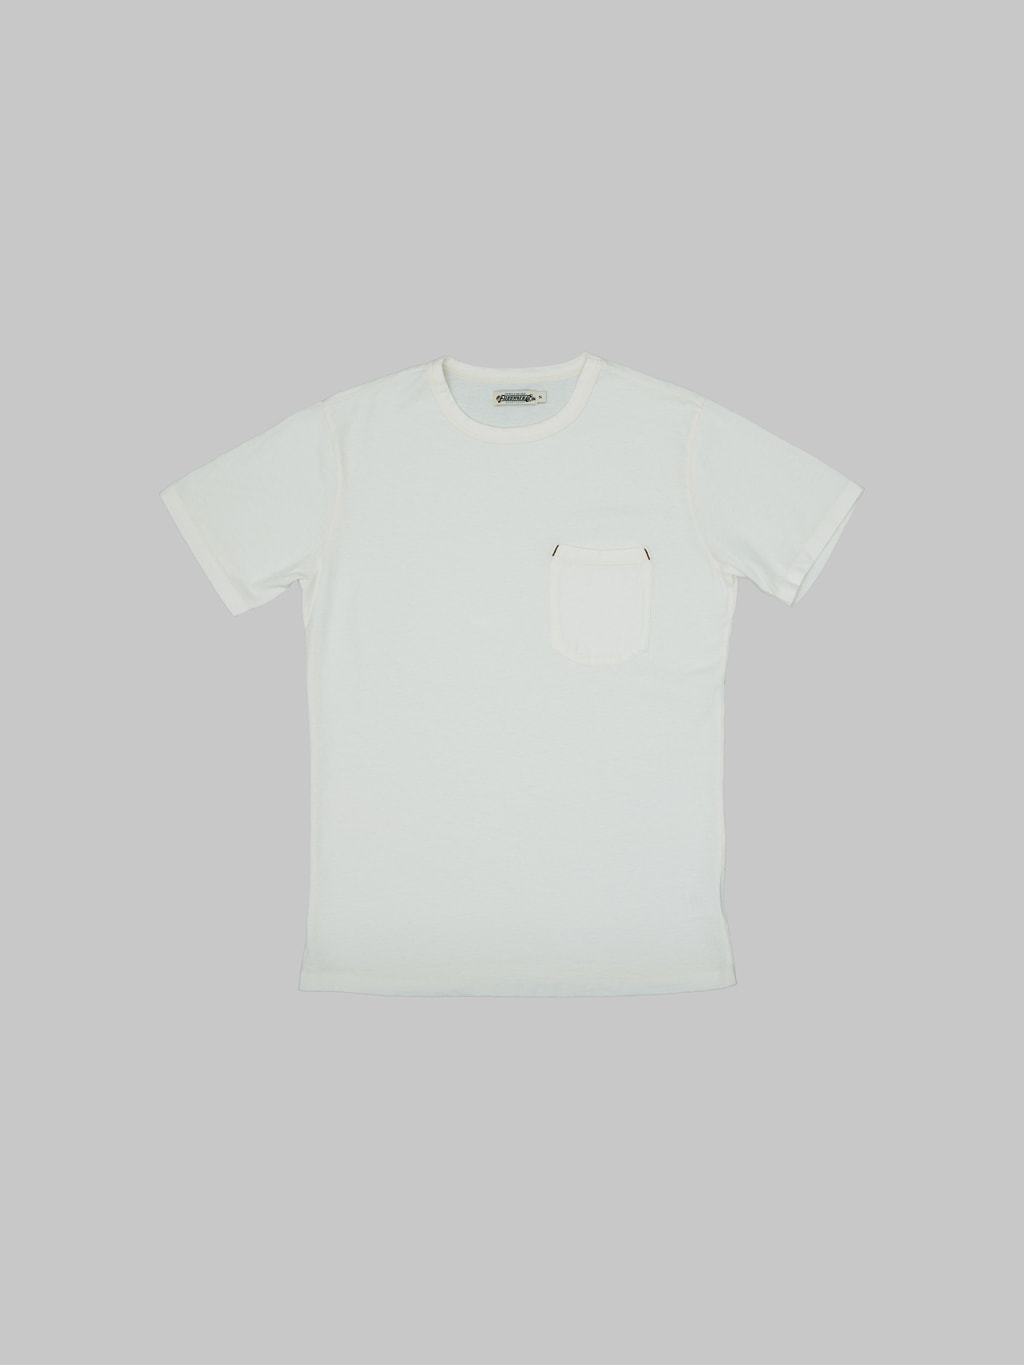 freenote cloth 9 ounce pocket t shirt white made in USA